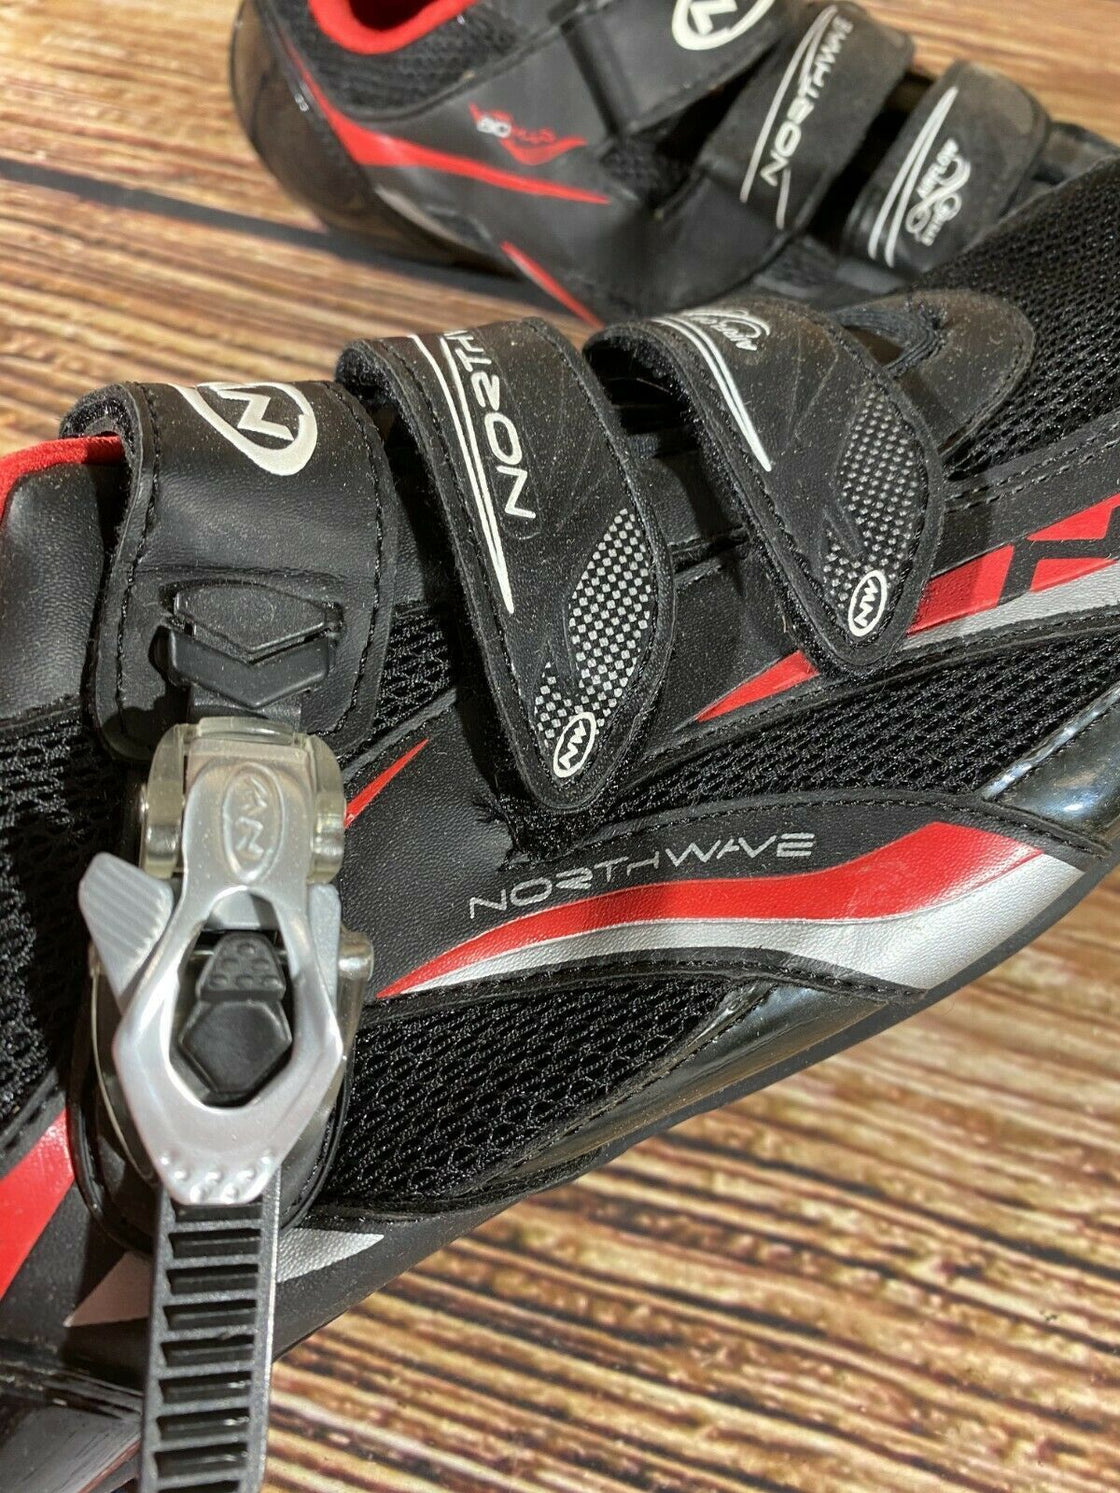 NORTHWAVE Carbon Road Cycling Shoes Vintage Road Bike Size EU46 US13 with Cleats